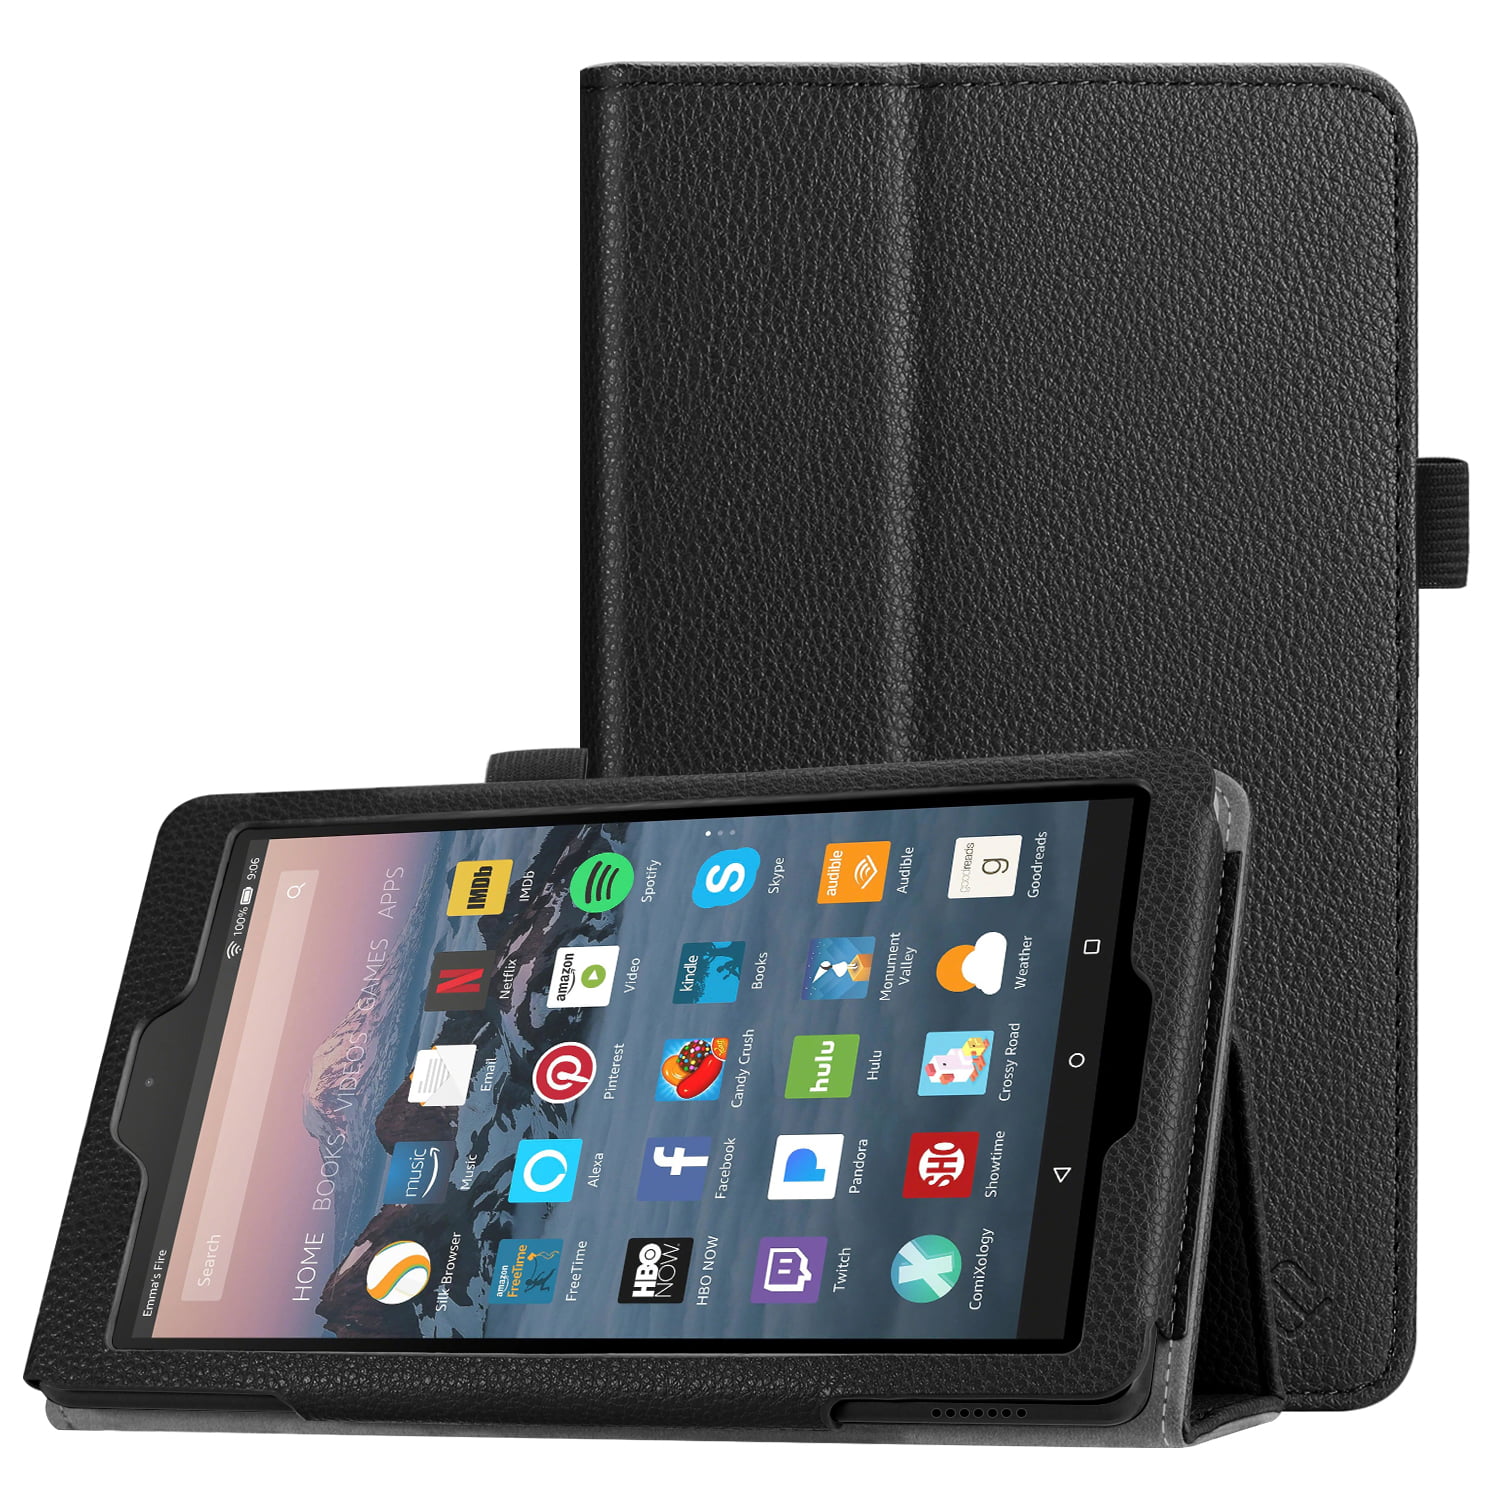 Case for Fire 7 Tablet (9th Generation, 2019 Release